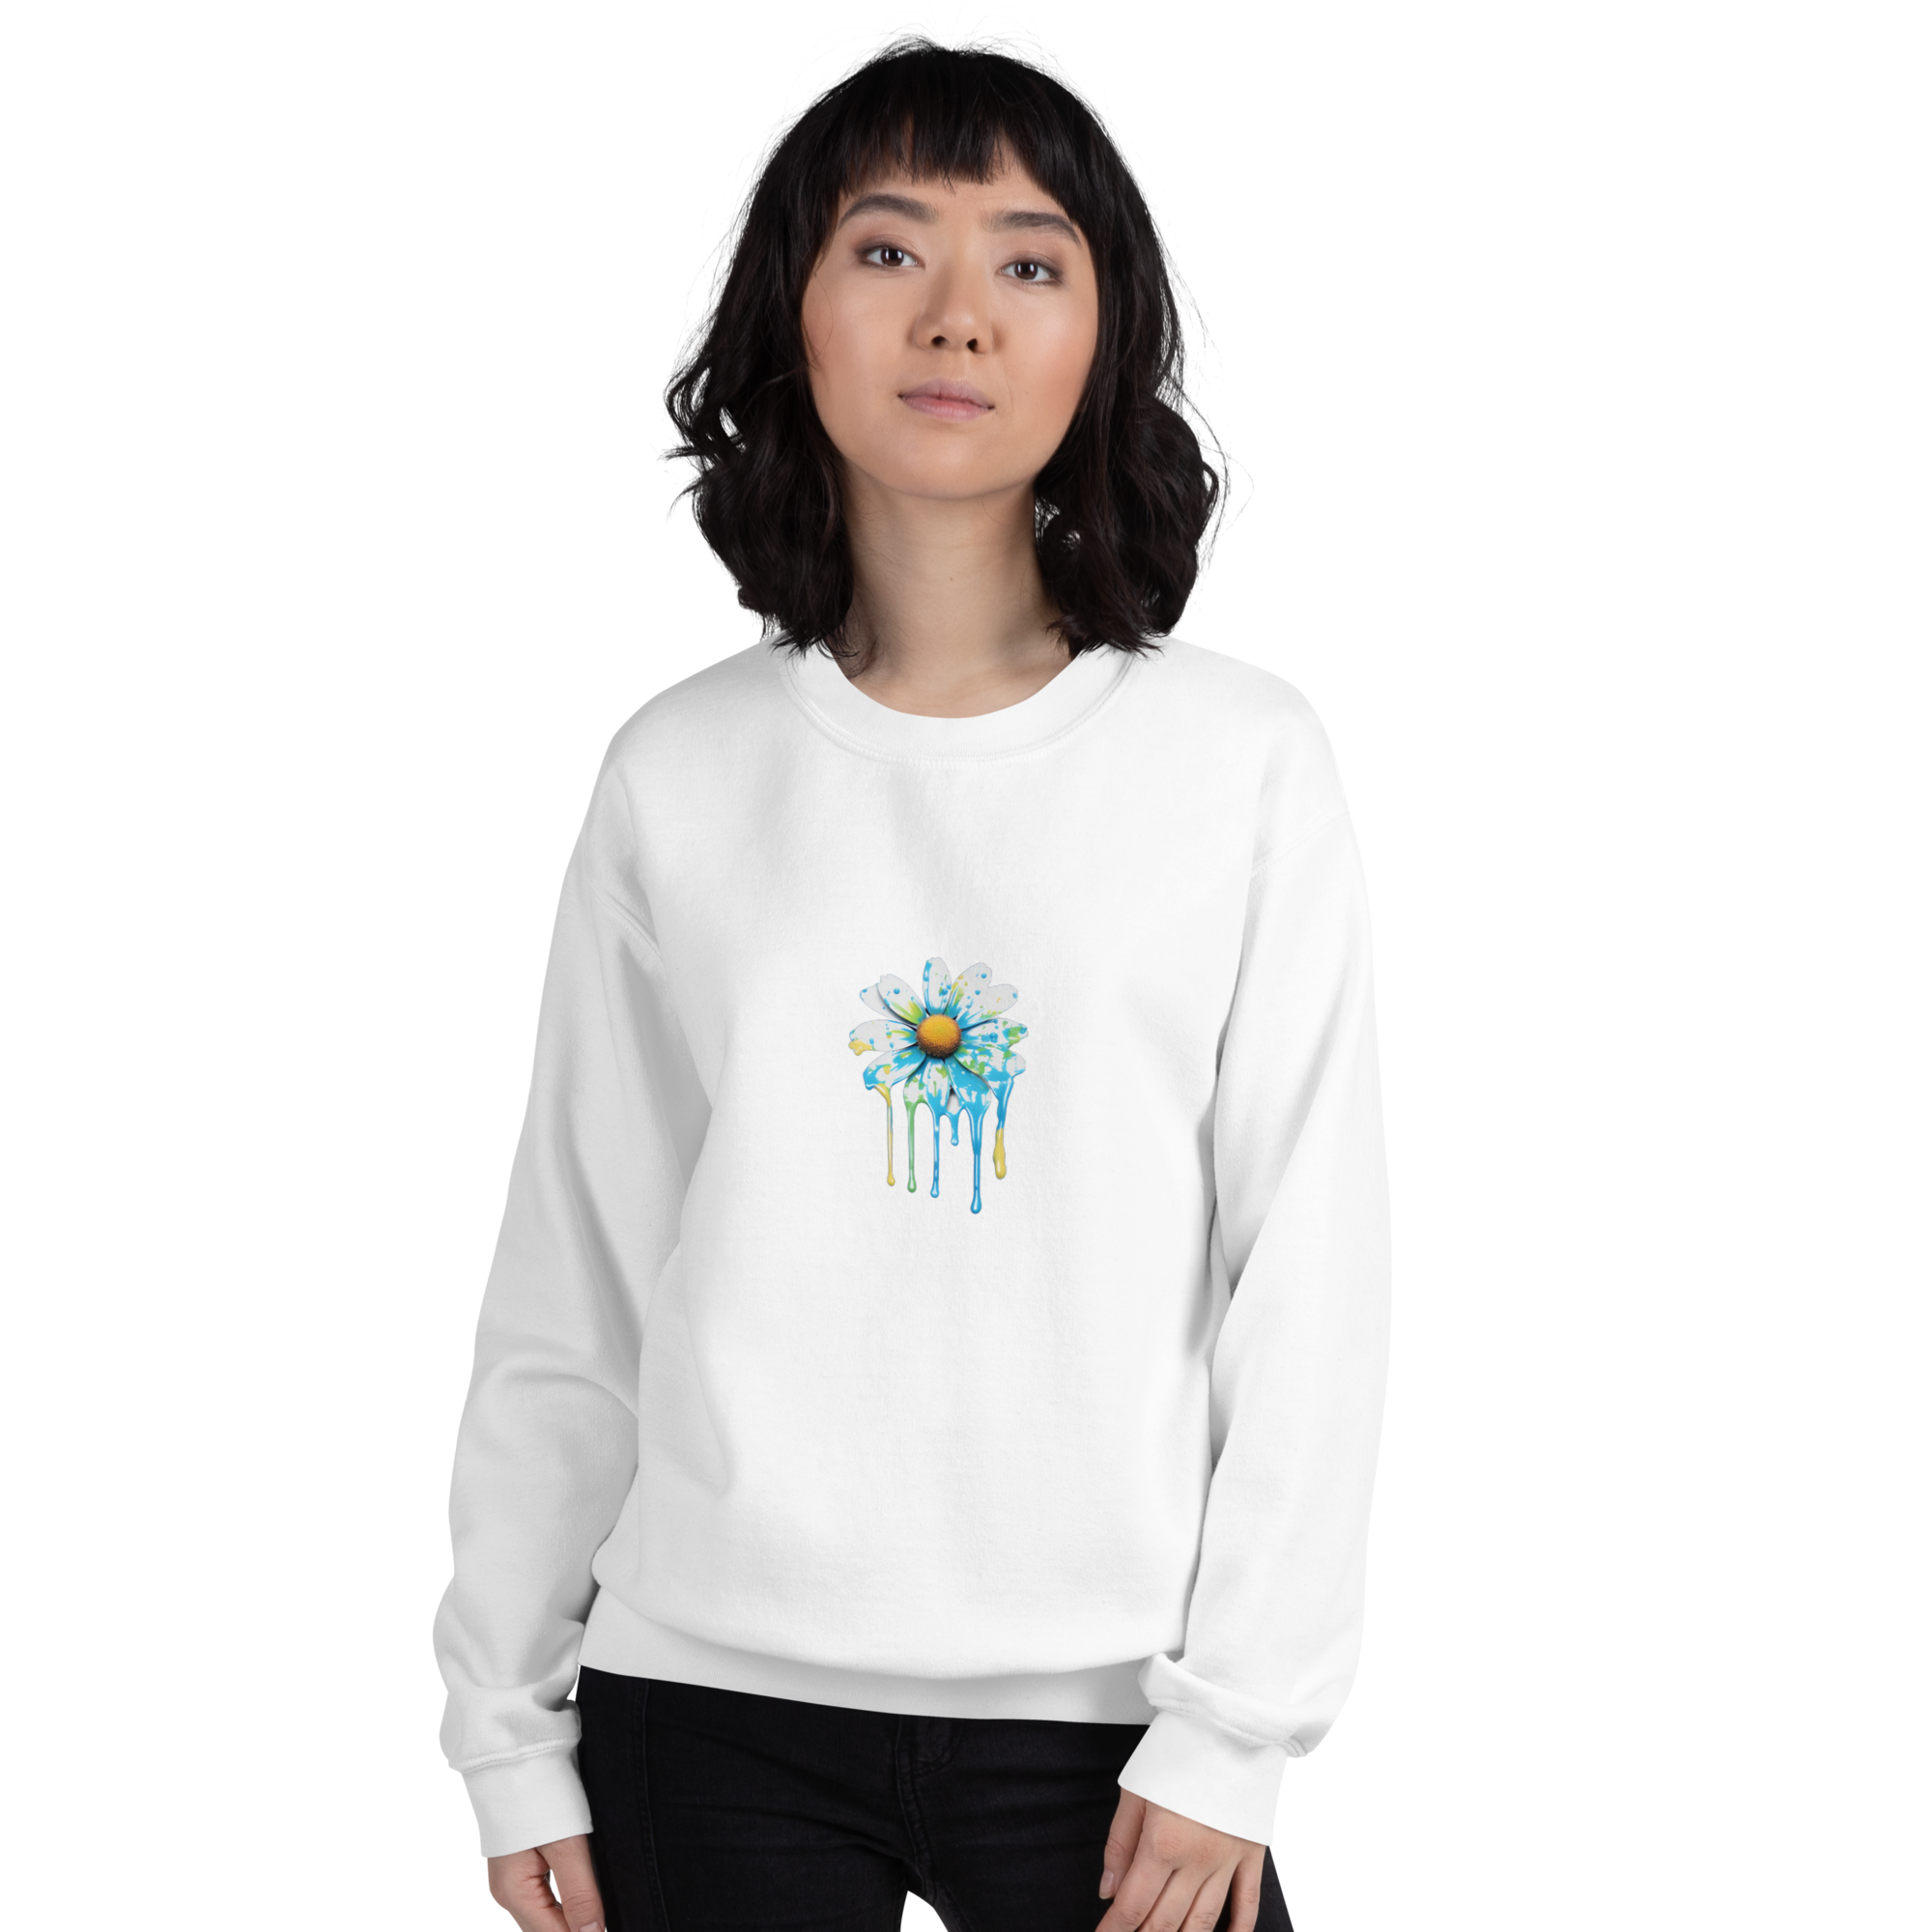 White Crewneck sweatshirt with Daisy dripping blue green and yellow paint